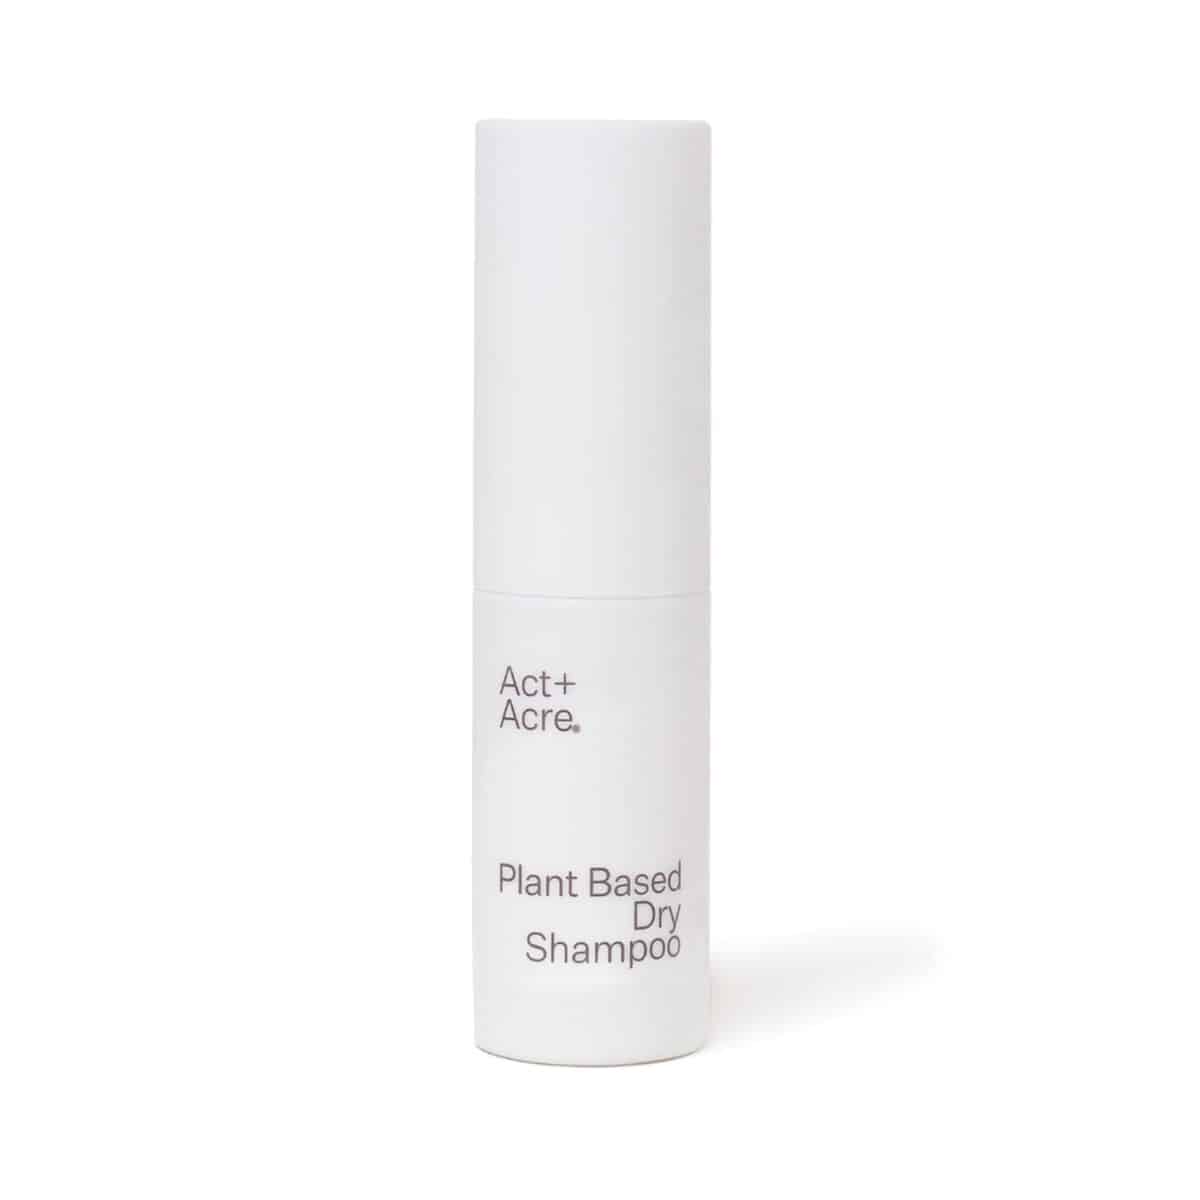 A bottle of Act + Acre dry shampoo.